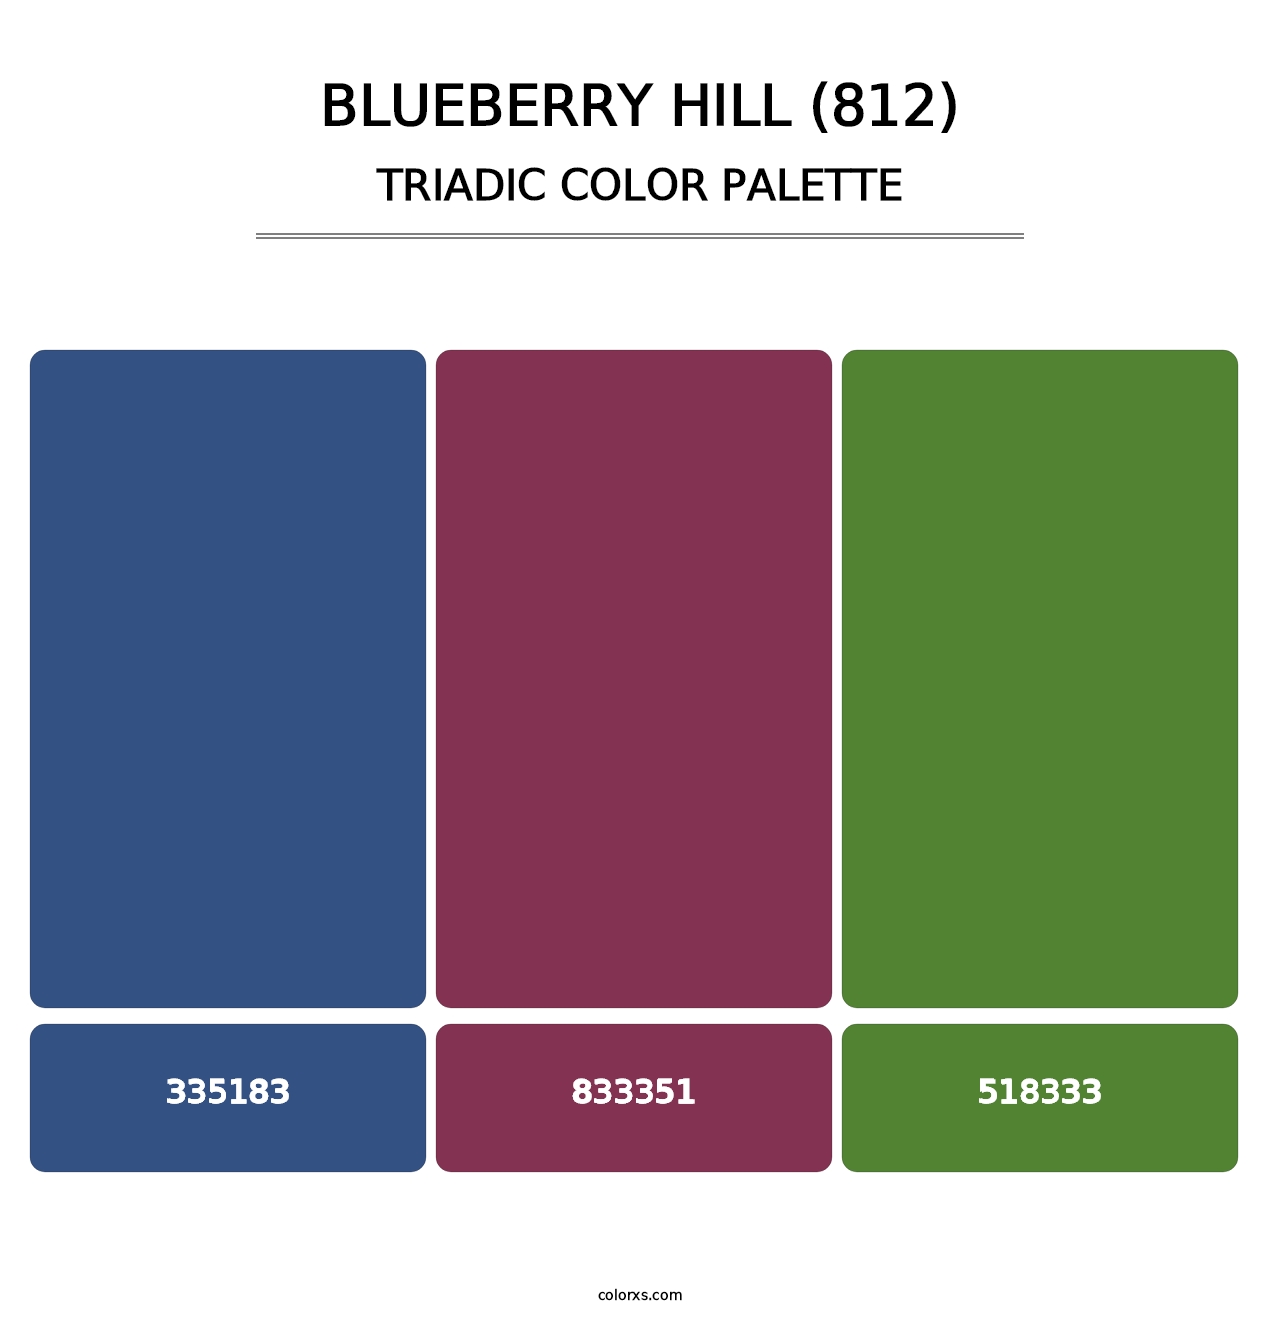 Blueberry Hill (812) - Triadic Color Palette